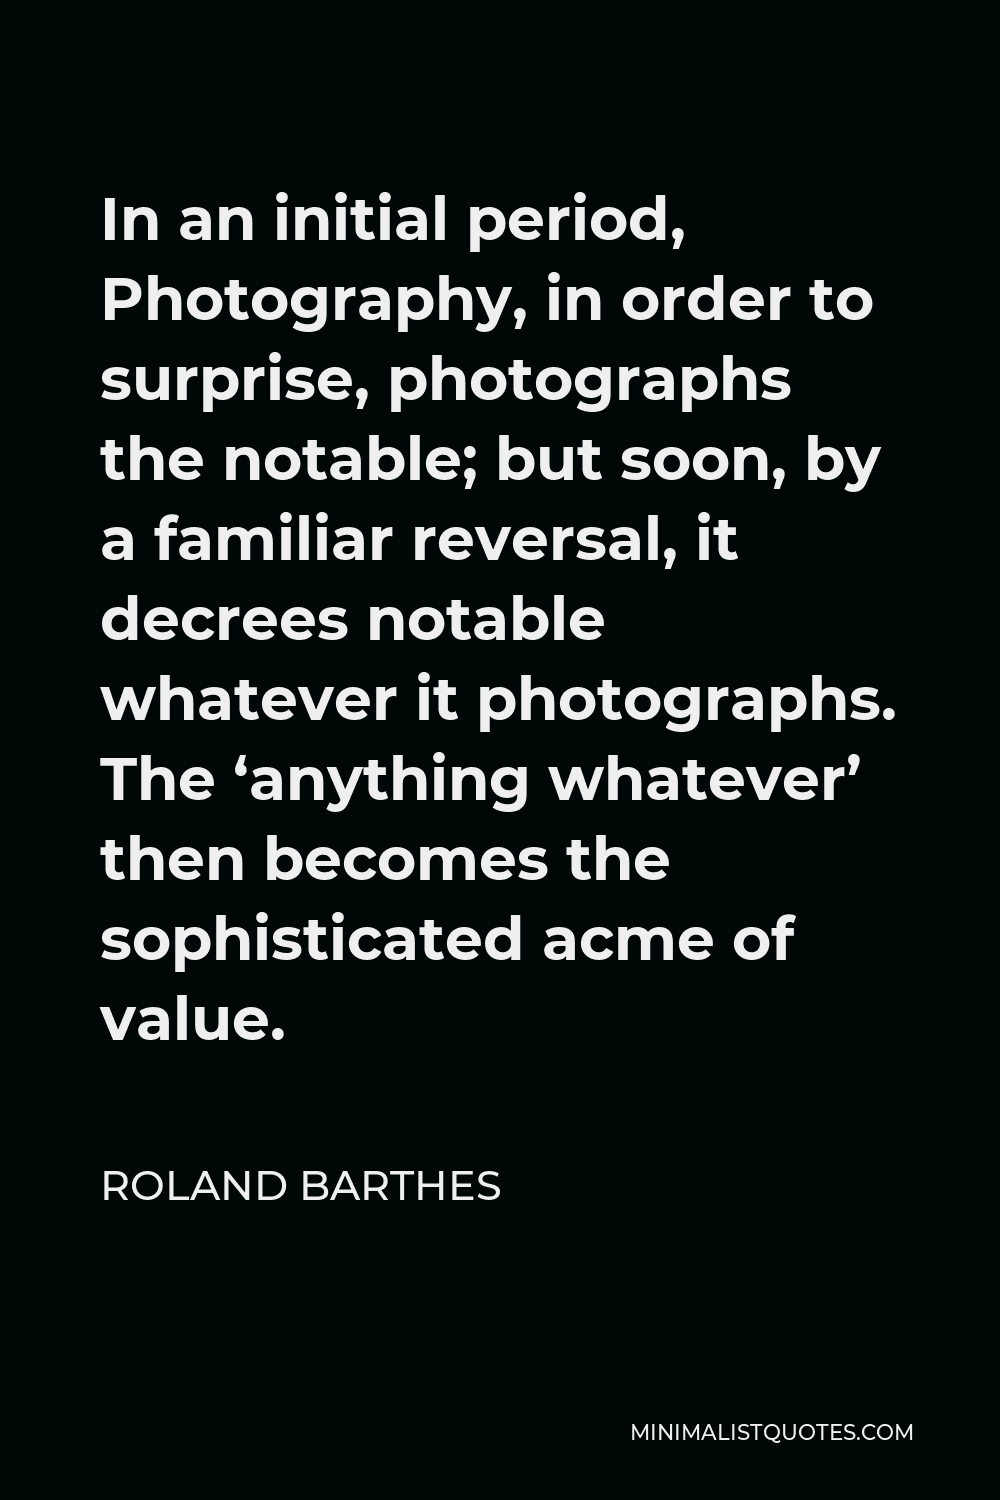 Roland Barthes Quote - In an initial period, Photography, in order to surprise, photographs the notable; but soon, by a familiar reversal, it decrees notable whatever it photographs. The ‘anything whatever’ then becomes the sophisticated acme of value.